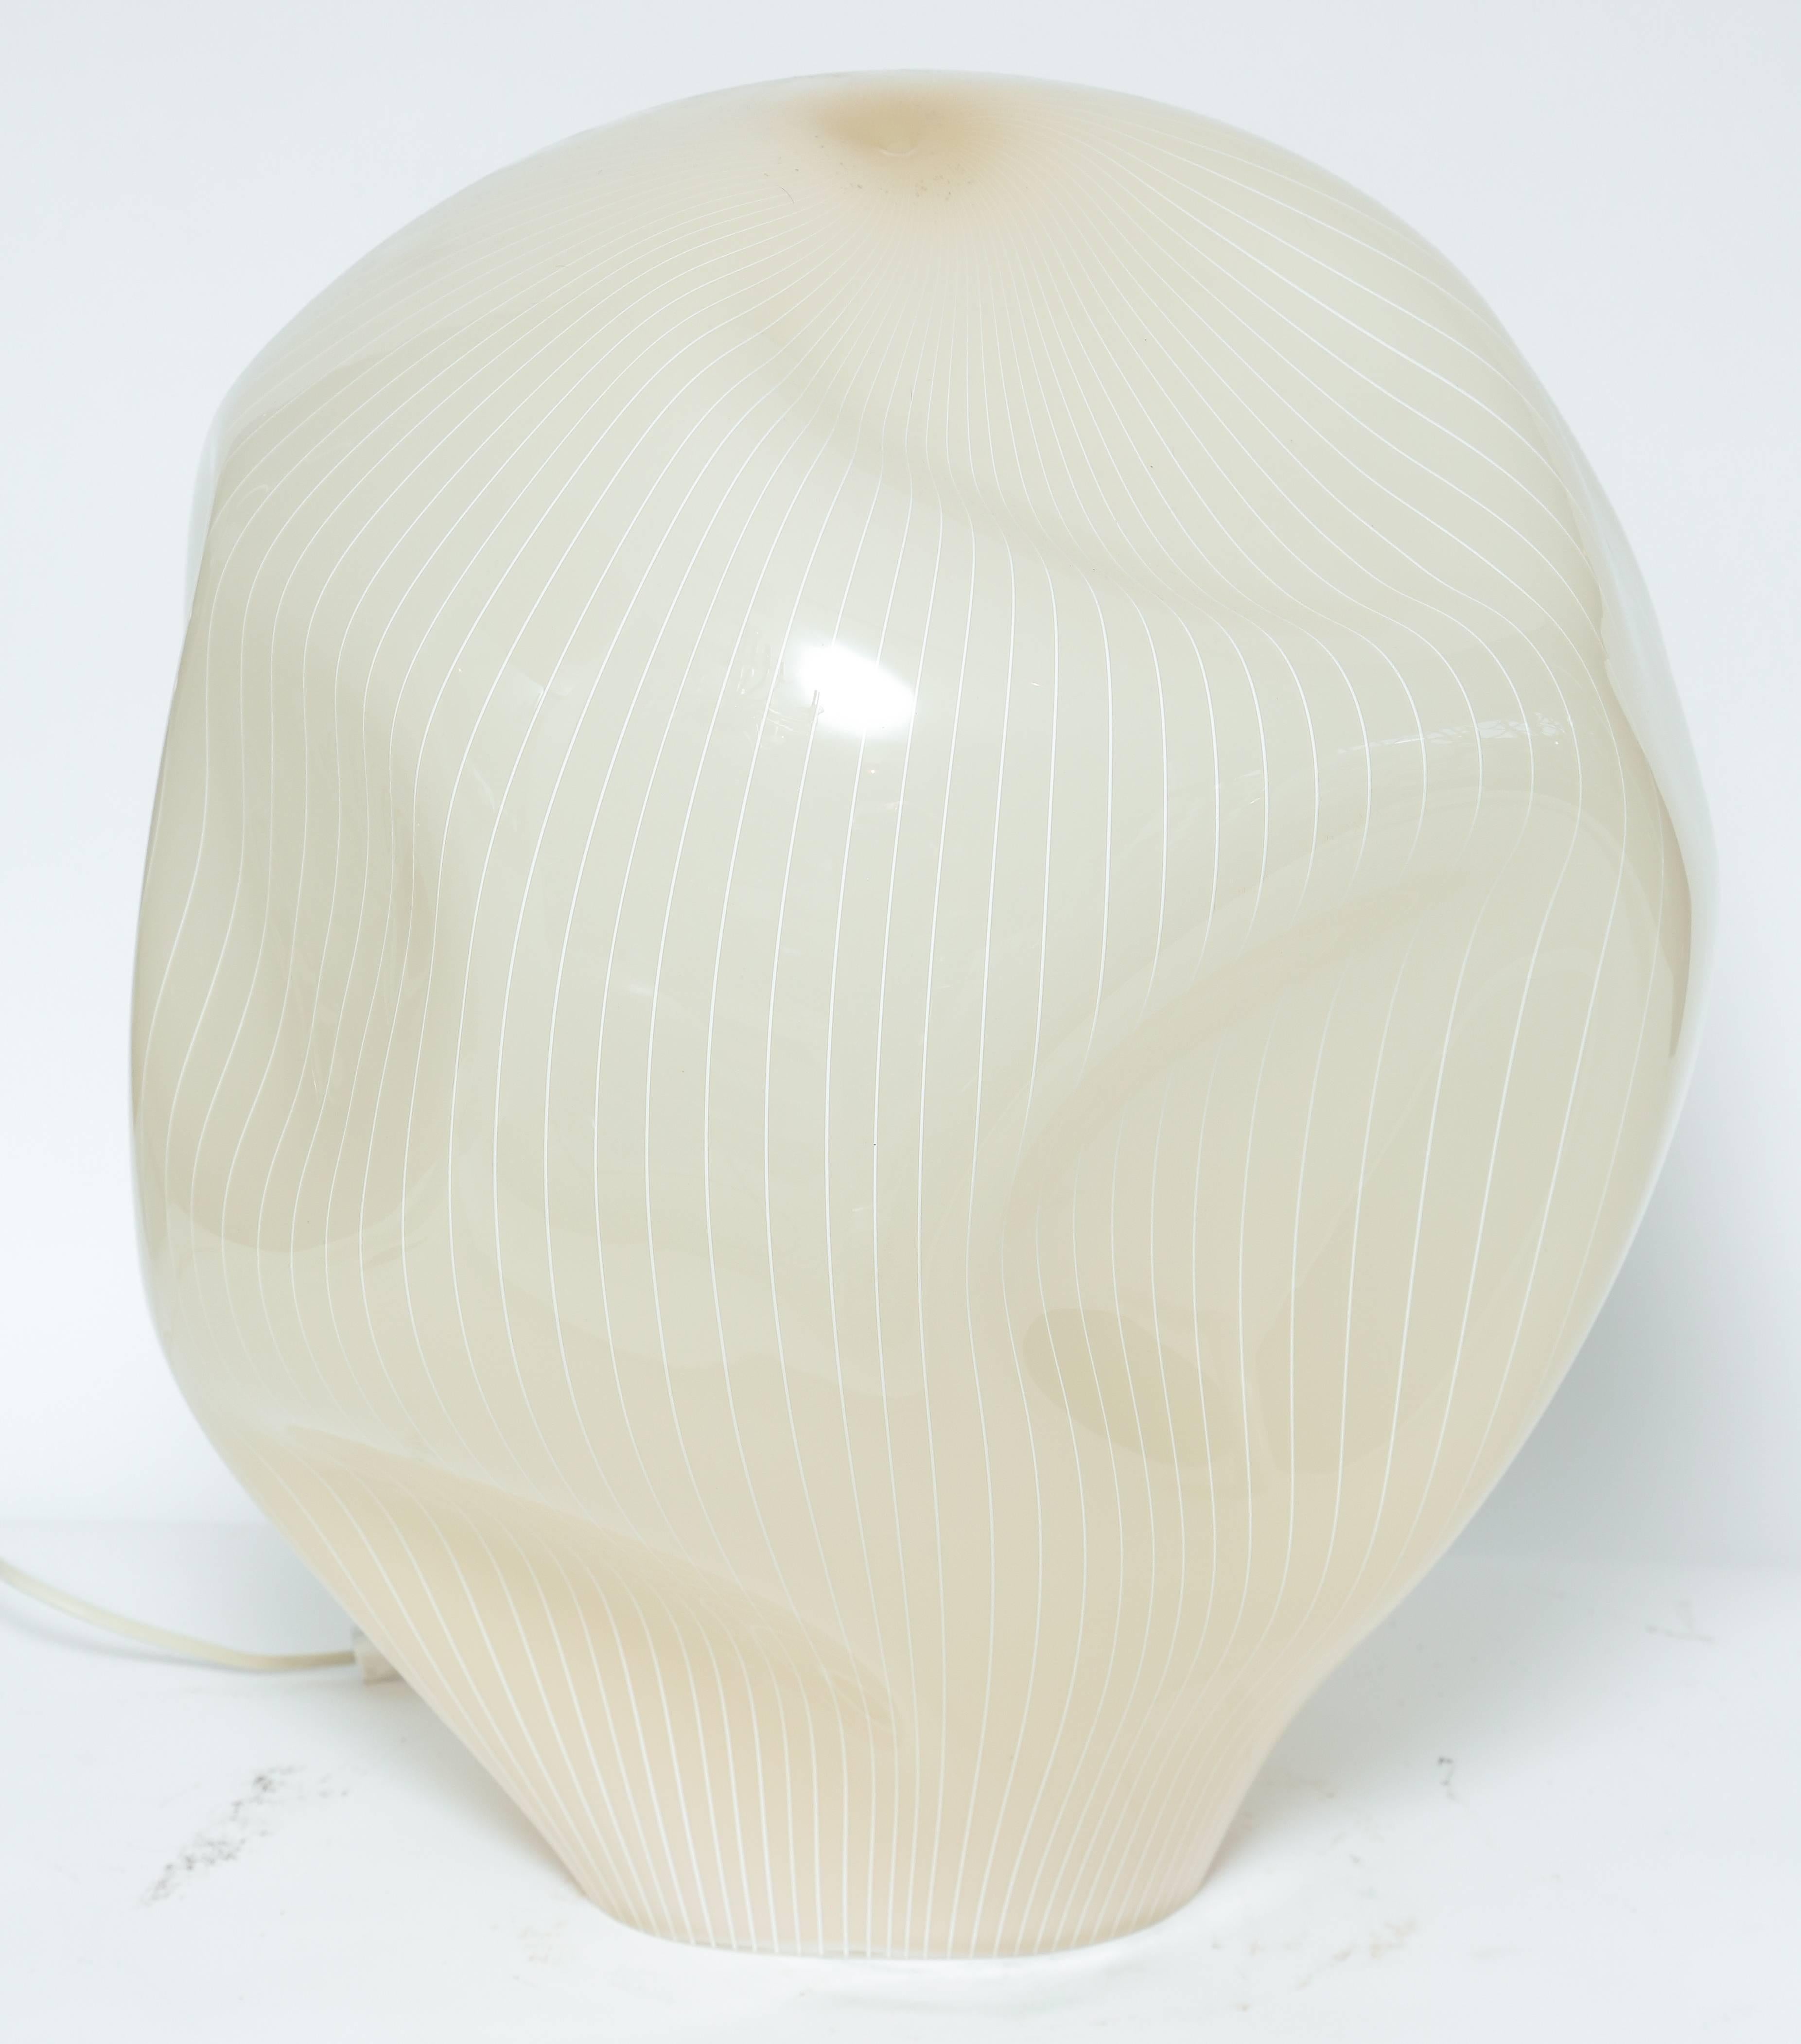 Handblown and designed by Gino Vistosi, this glass lamp is very sculptural. Soft amber color with white pin stripes this lamp emmits a warm glow. In excellent vintage condition this lamp uses a regular bulb. Wiring original and in working order.